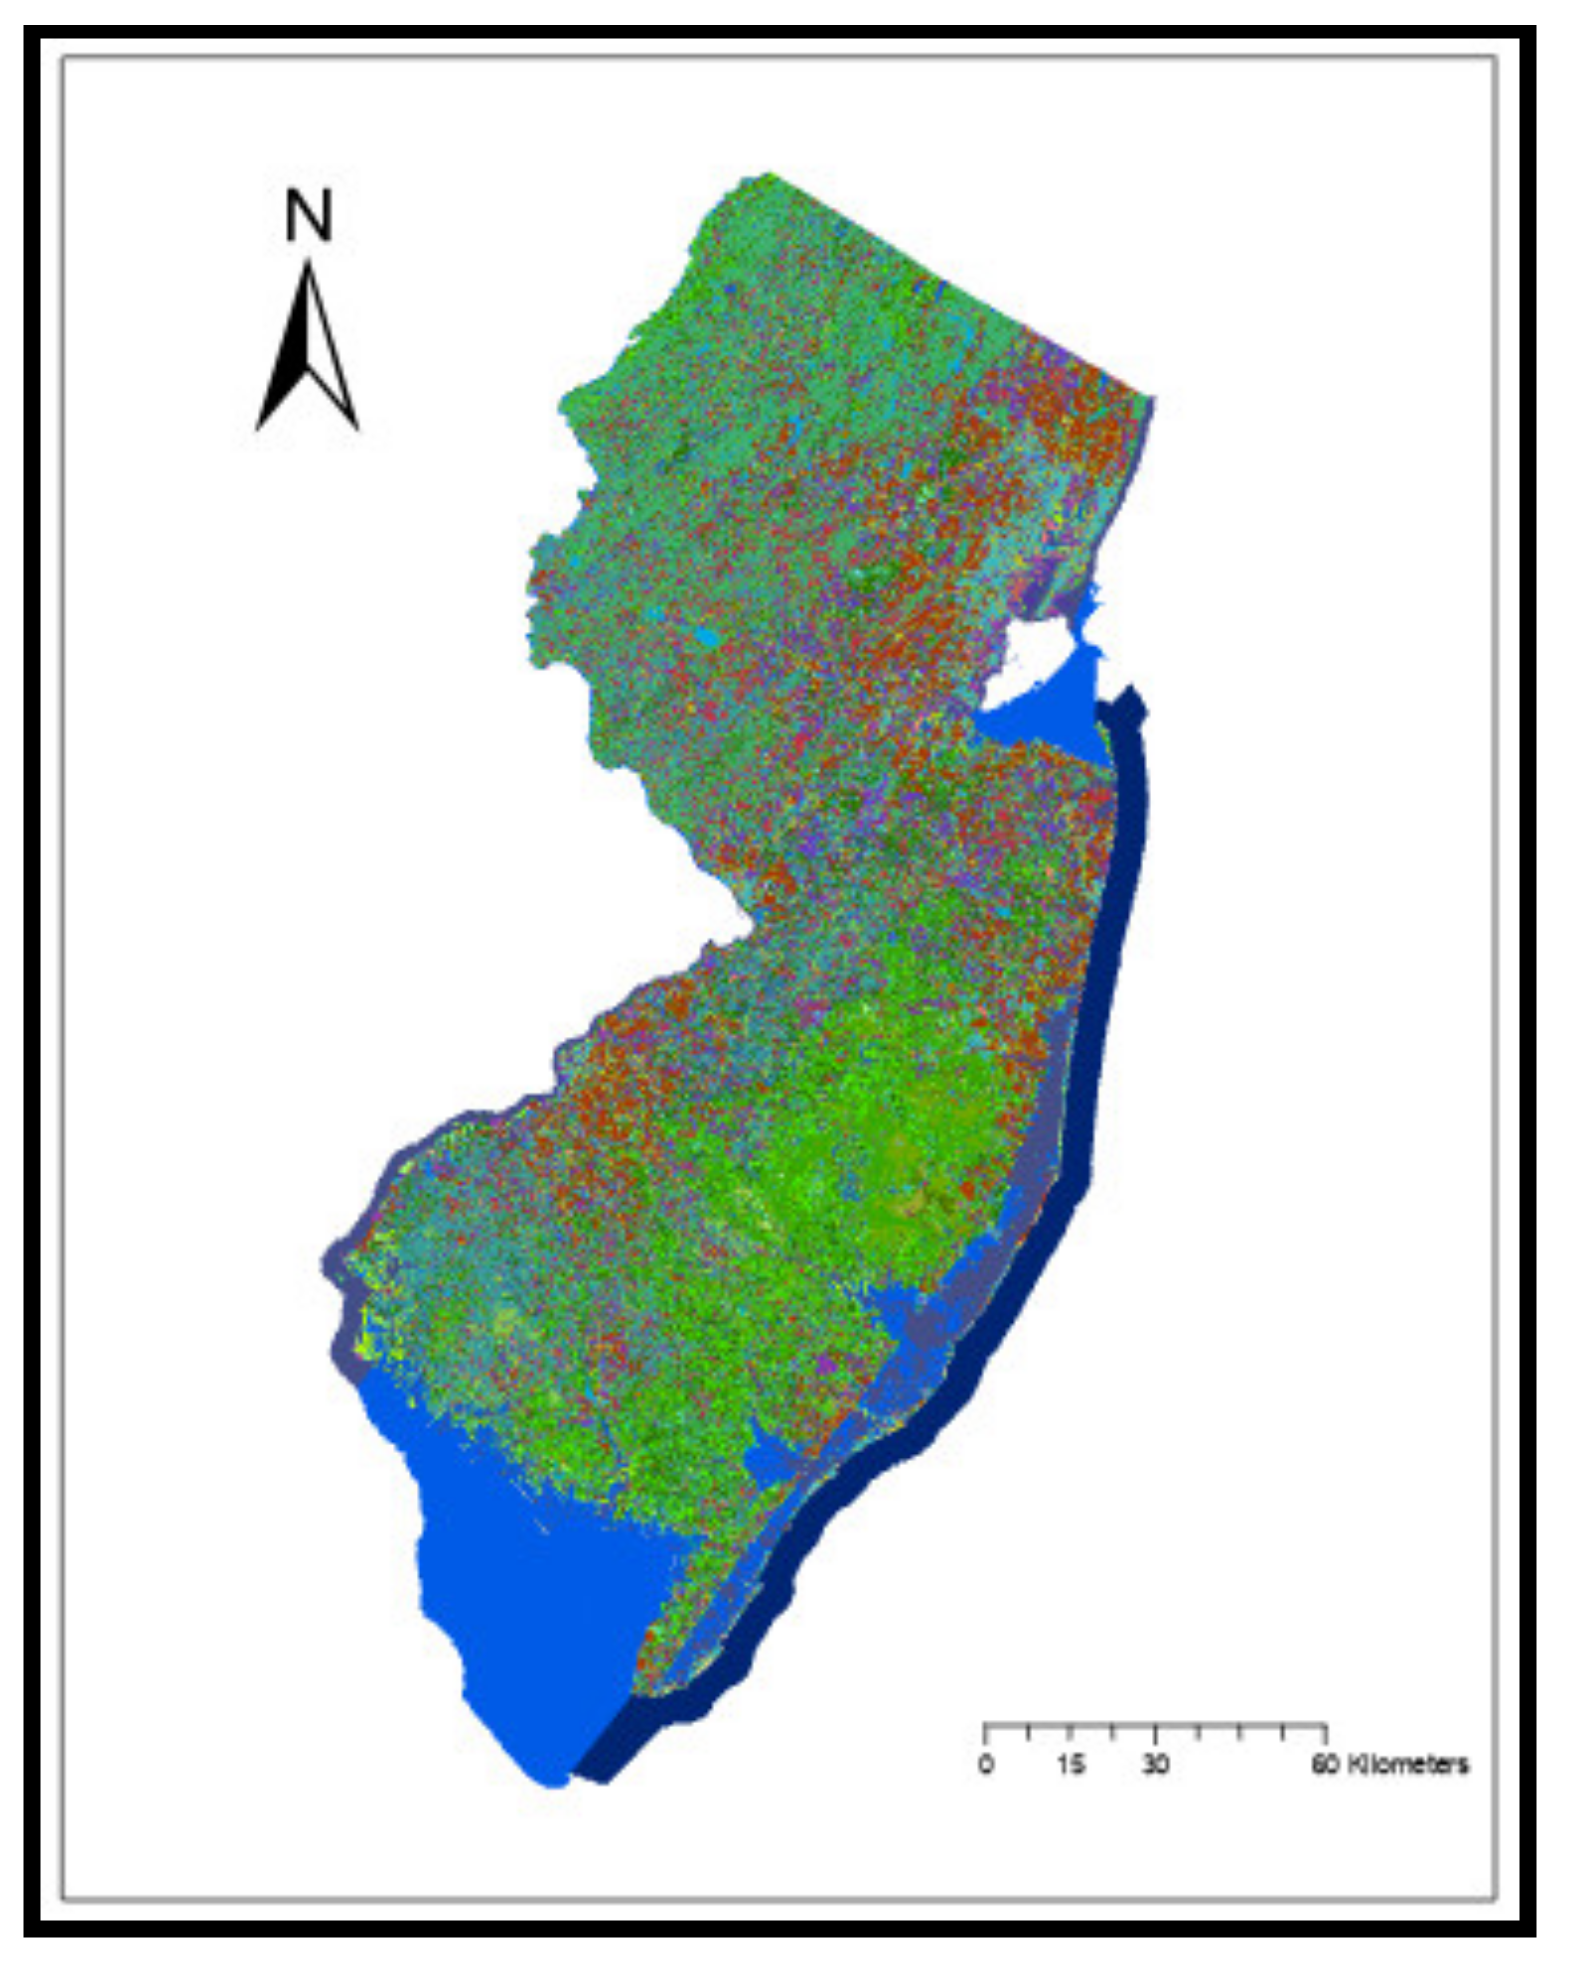 Earth | Free Full-Text | Analyzing and Predicting Land Use and Land Cover  Changes in New Jersey Using Multi-Layer Perceptron–Markov Chain Model